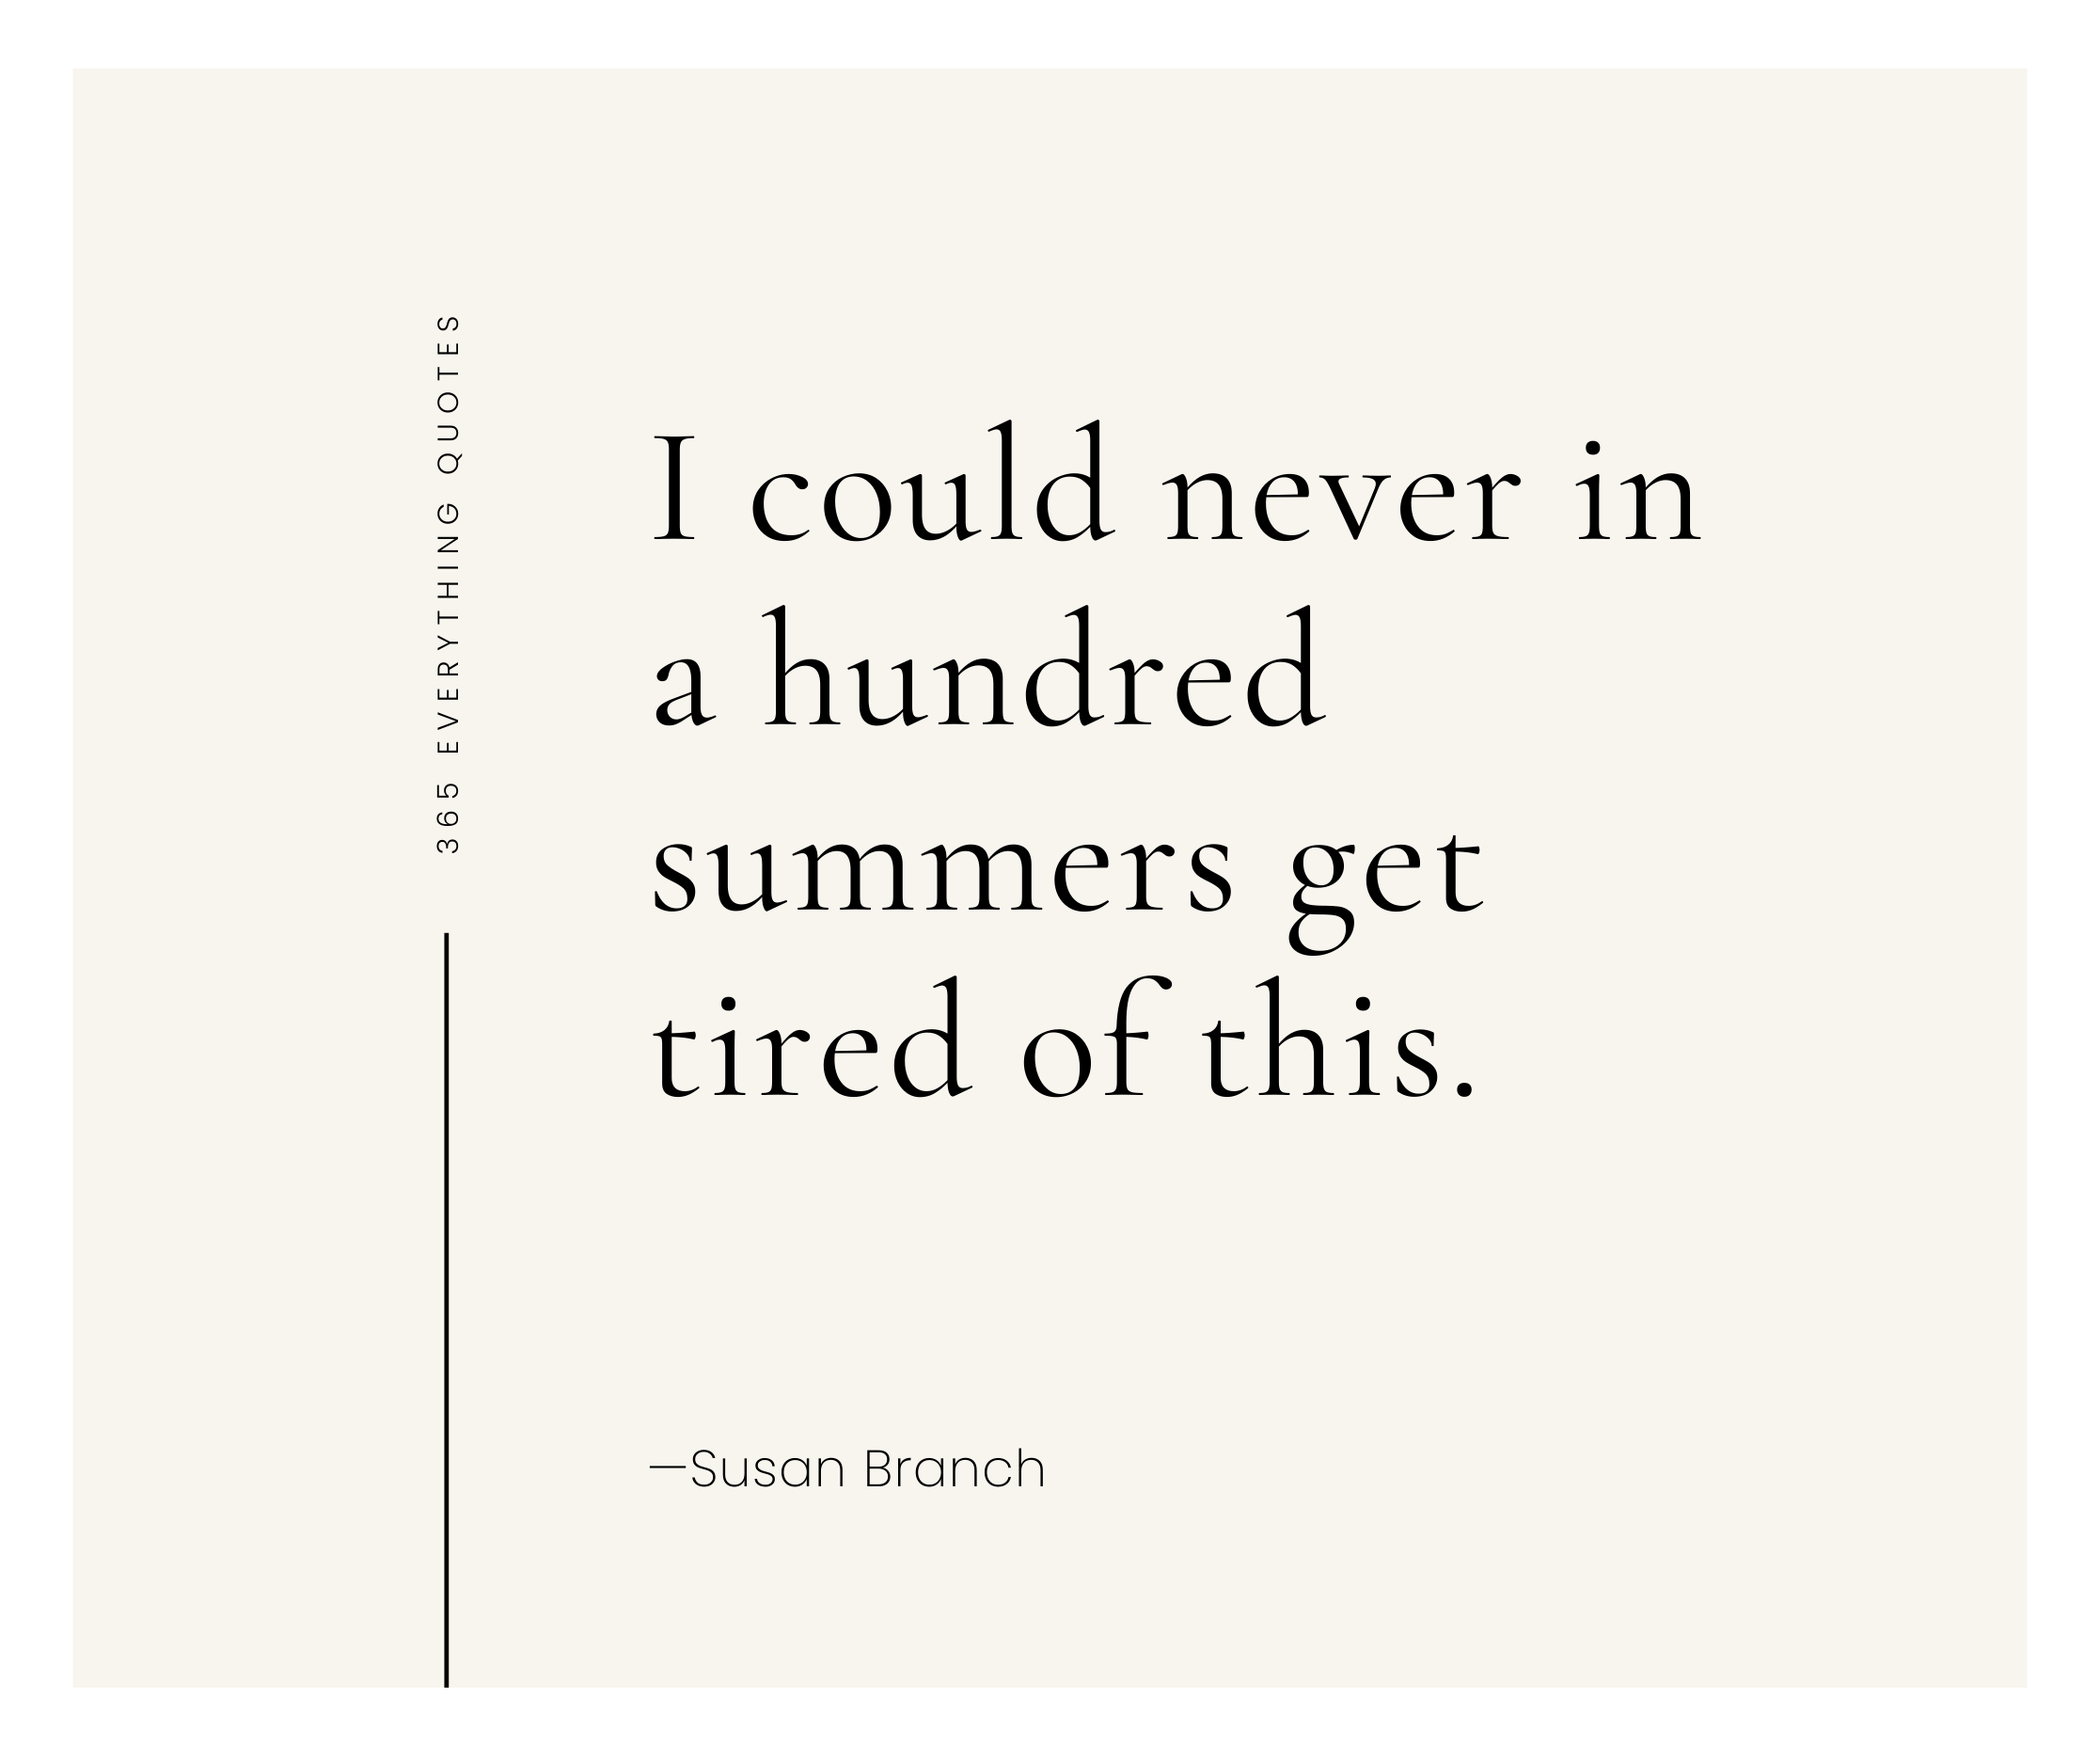 Quotes About Summer - the ultimate summer quotes collection